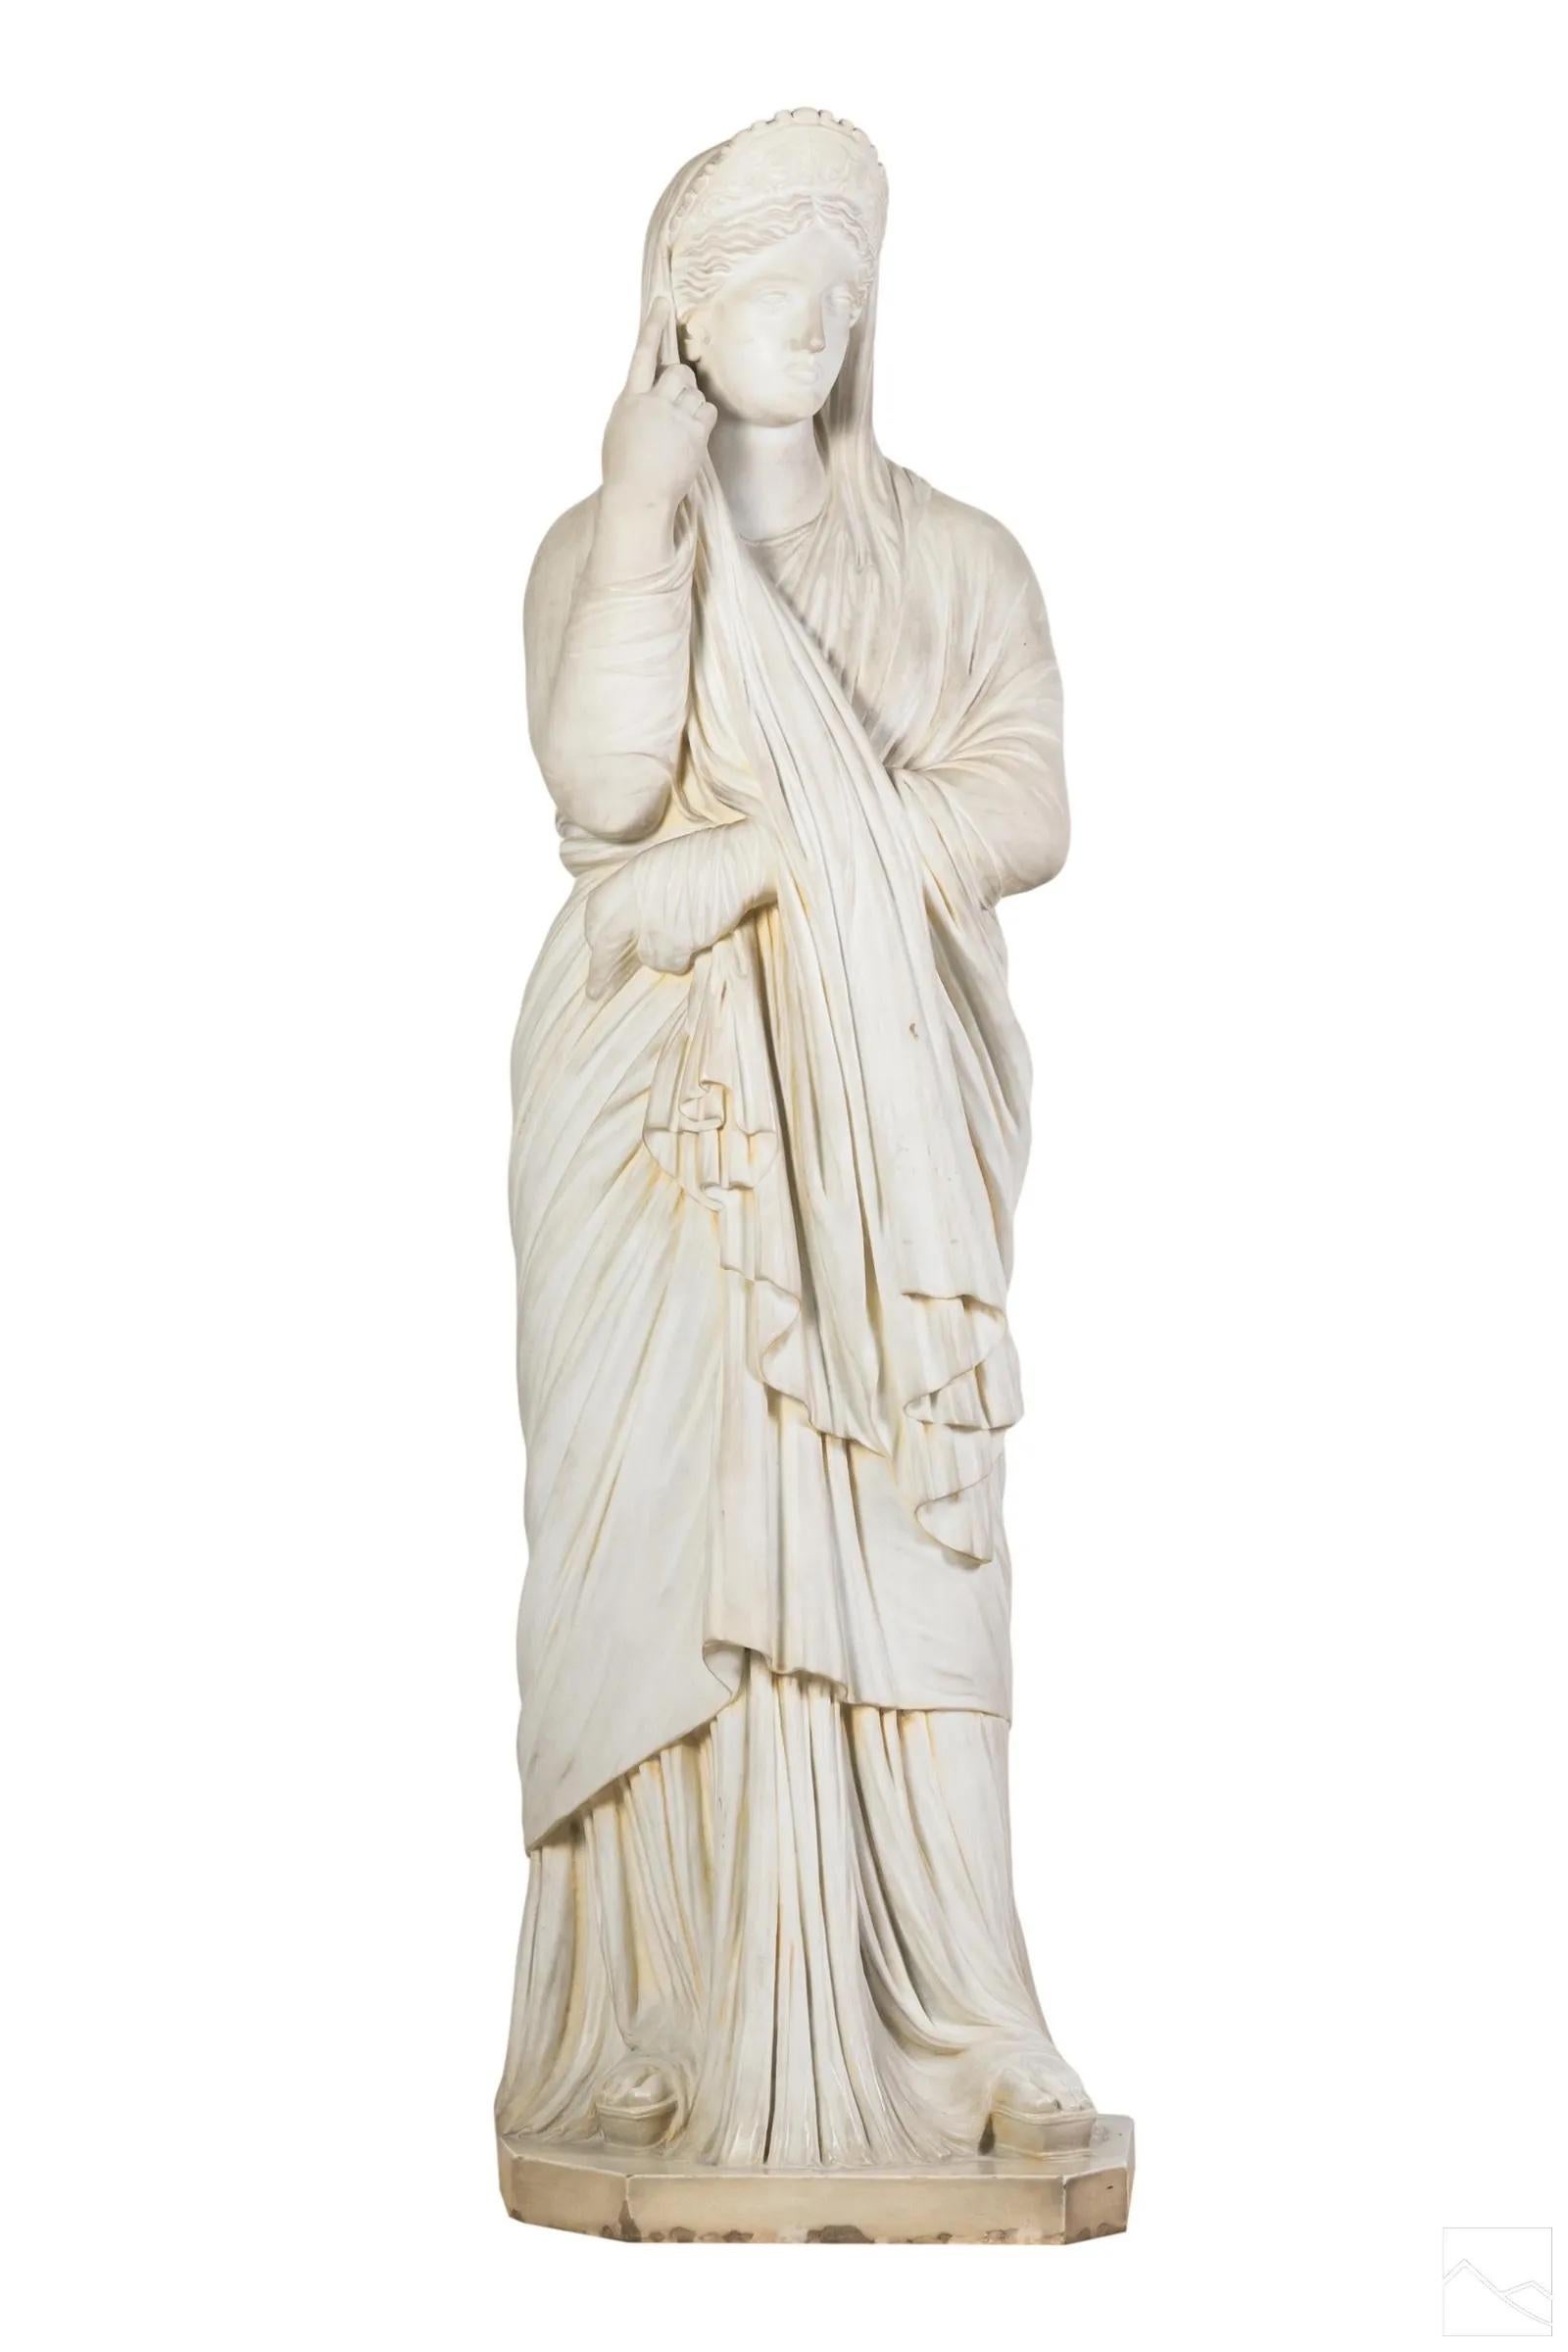 Grand Tour Carved Marble Statue of the Empress Livia Drusilla After the Antique. A true depiction of the Classical Statue of Rome's First Empress. 

Livia Drusilla (30 January 59 BC – 28 September AD 29) was Roman empress from 27 BC to AD 14 as